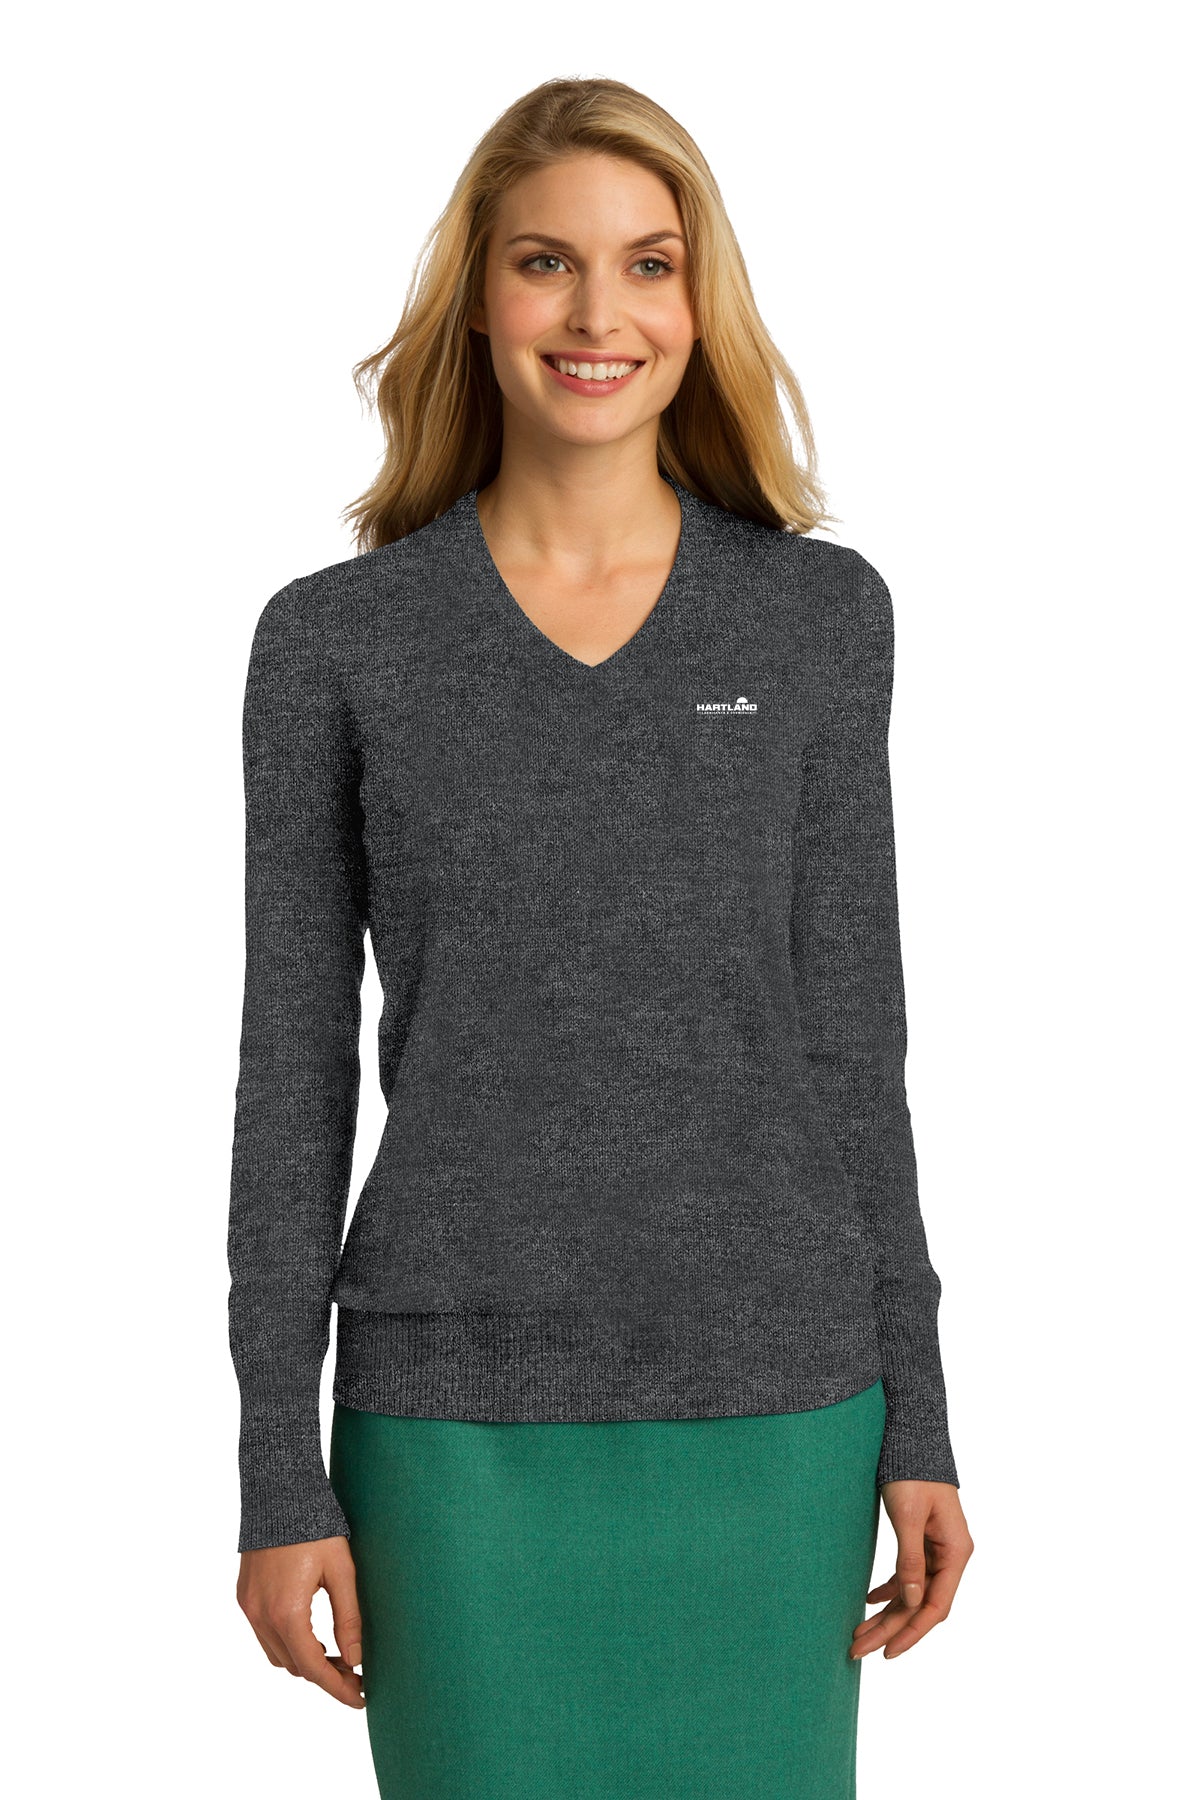 Hartland Lubricants and Chemicals Ladies V-Neck Sweater